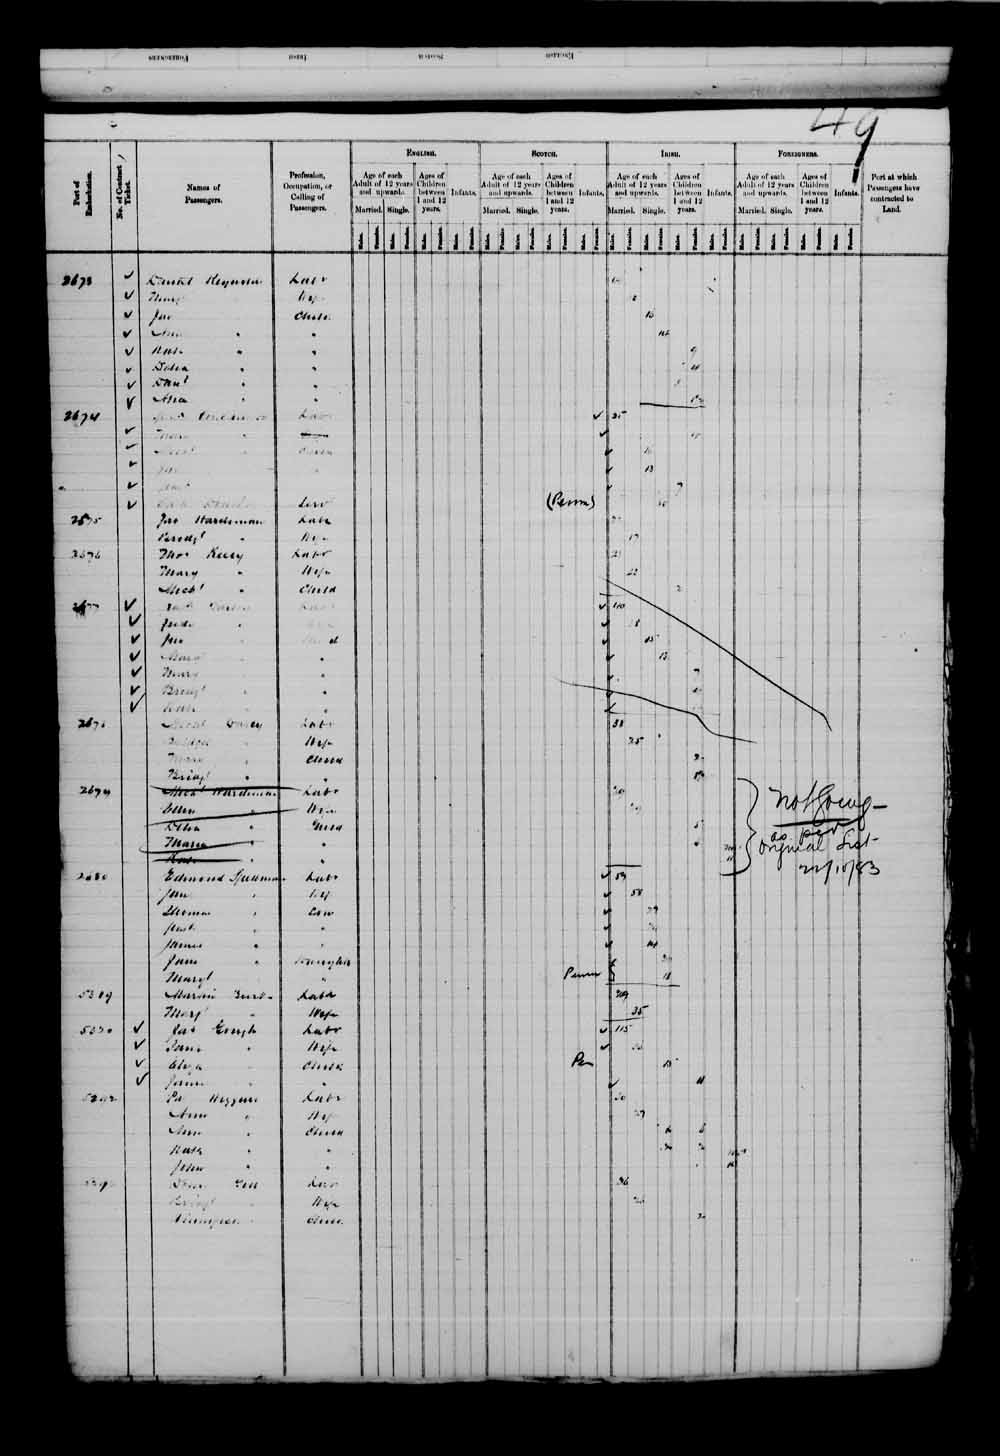 Digitized page of Passenger Lists for Image No.: e003543405